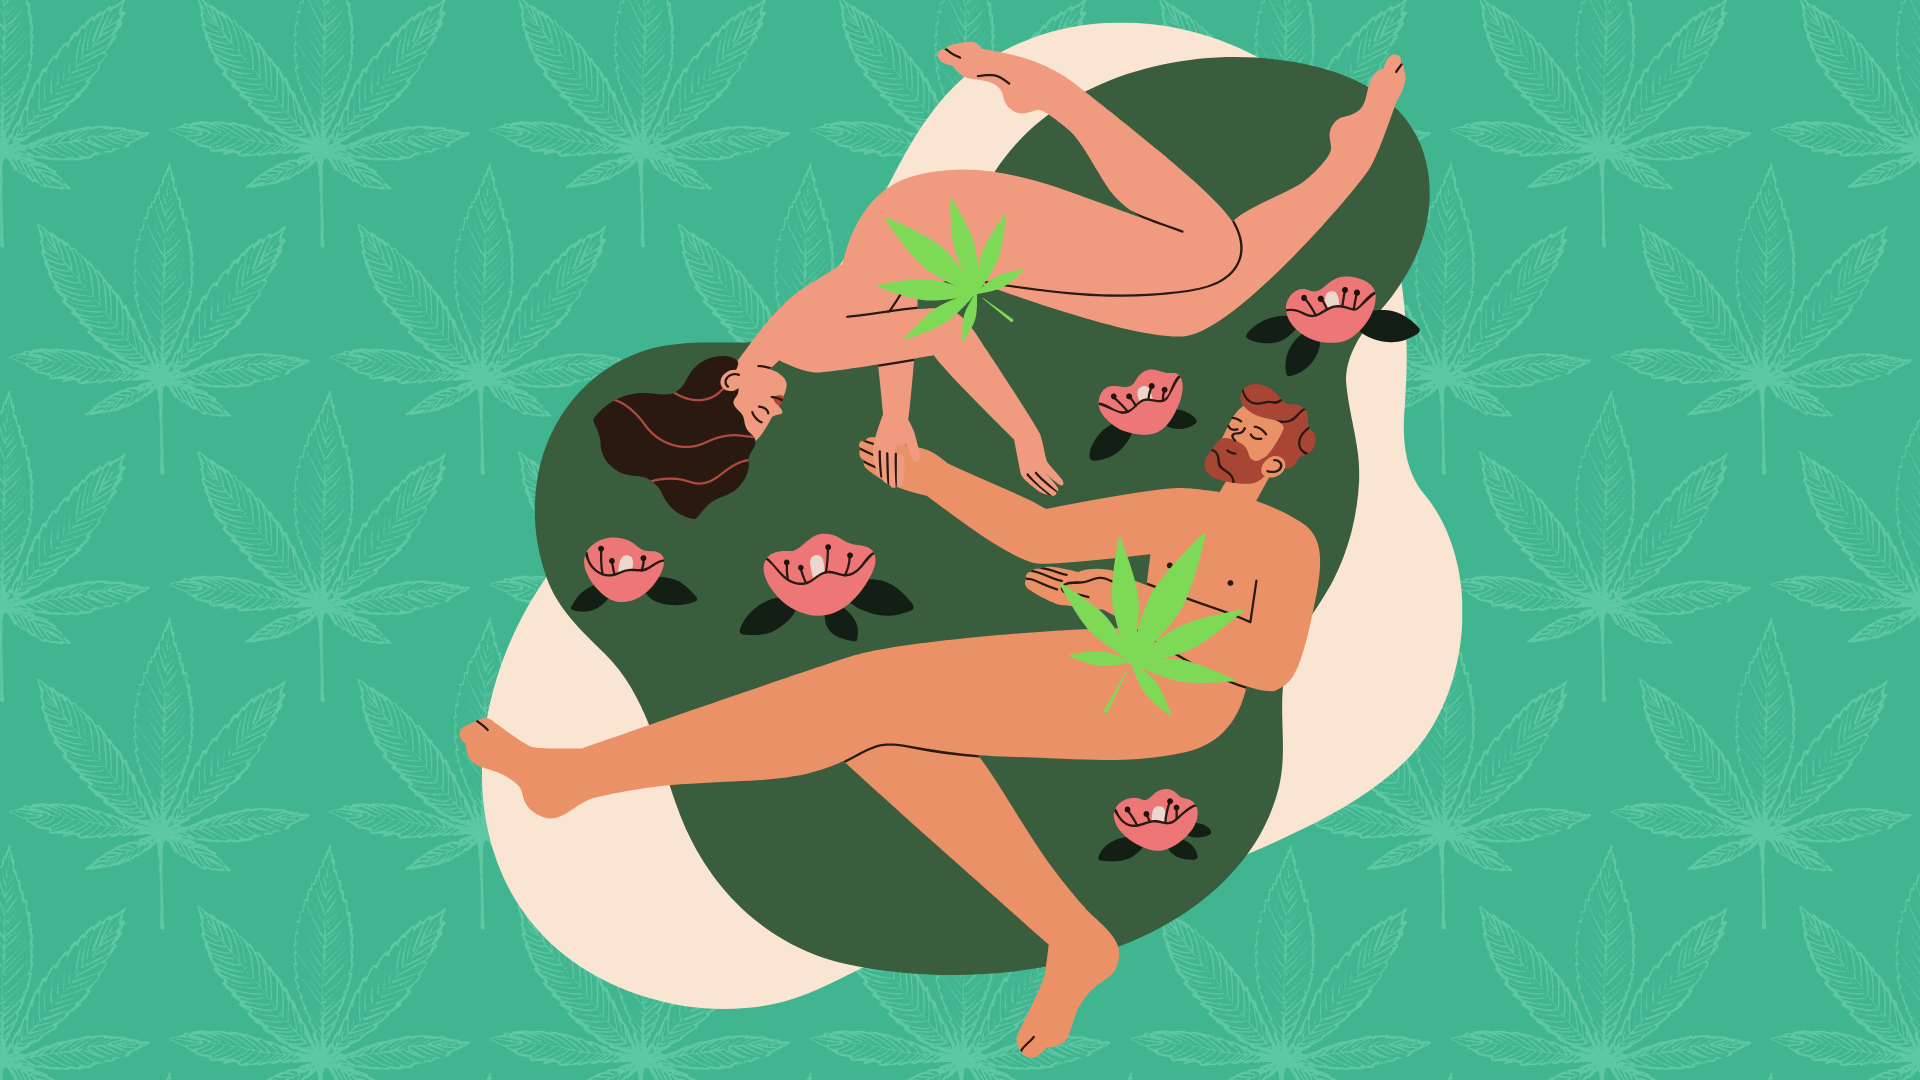 Cannabis and Sex